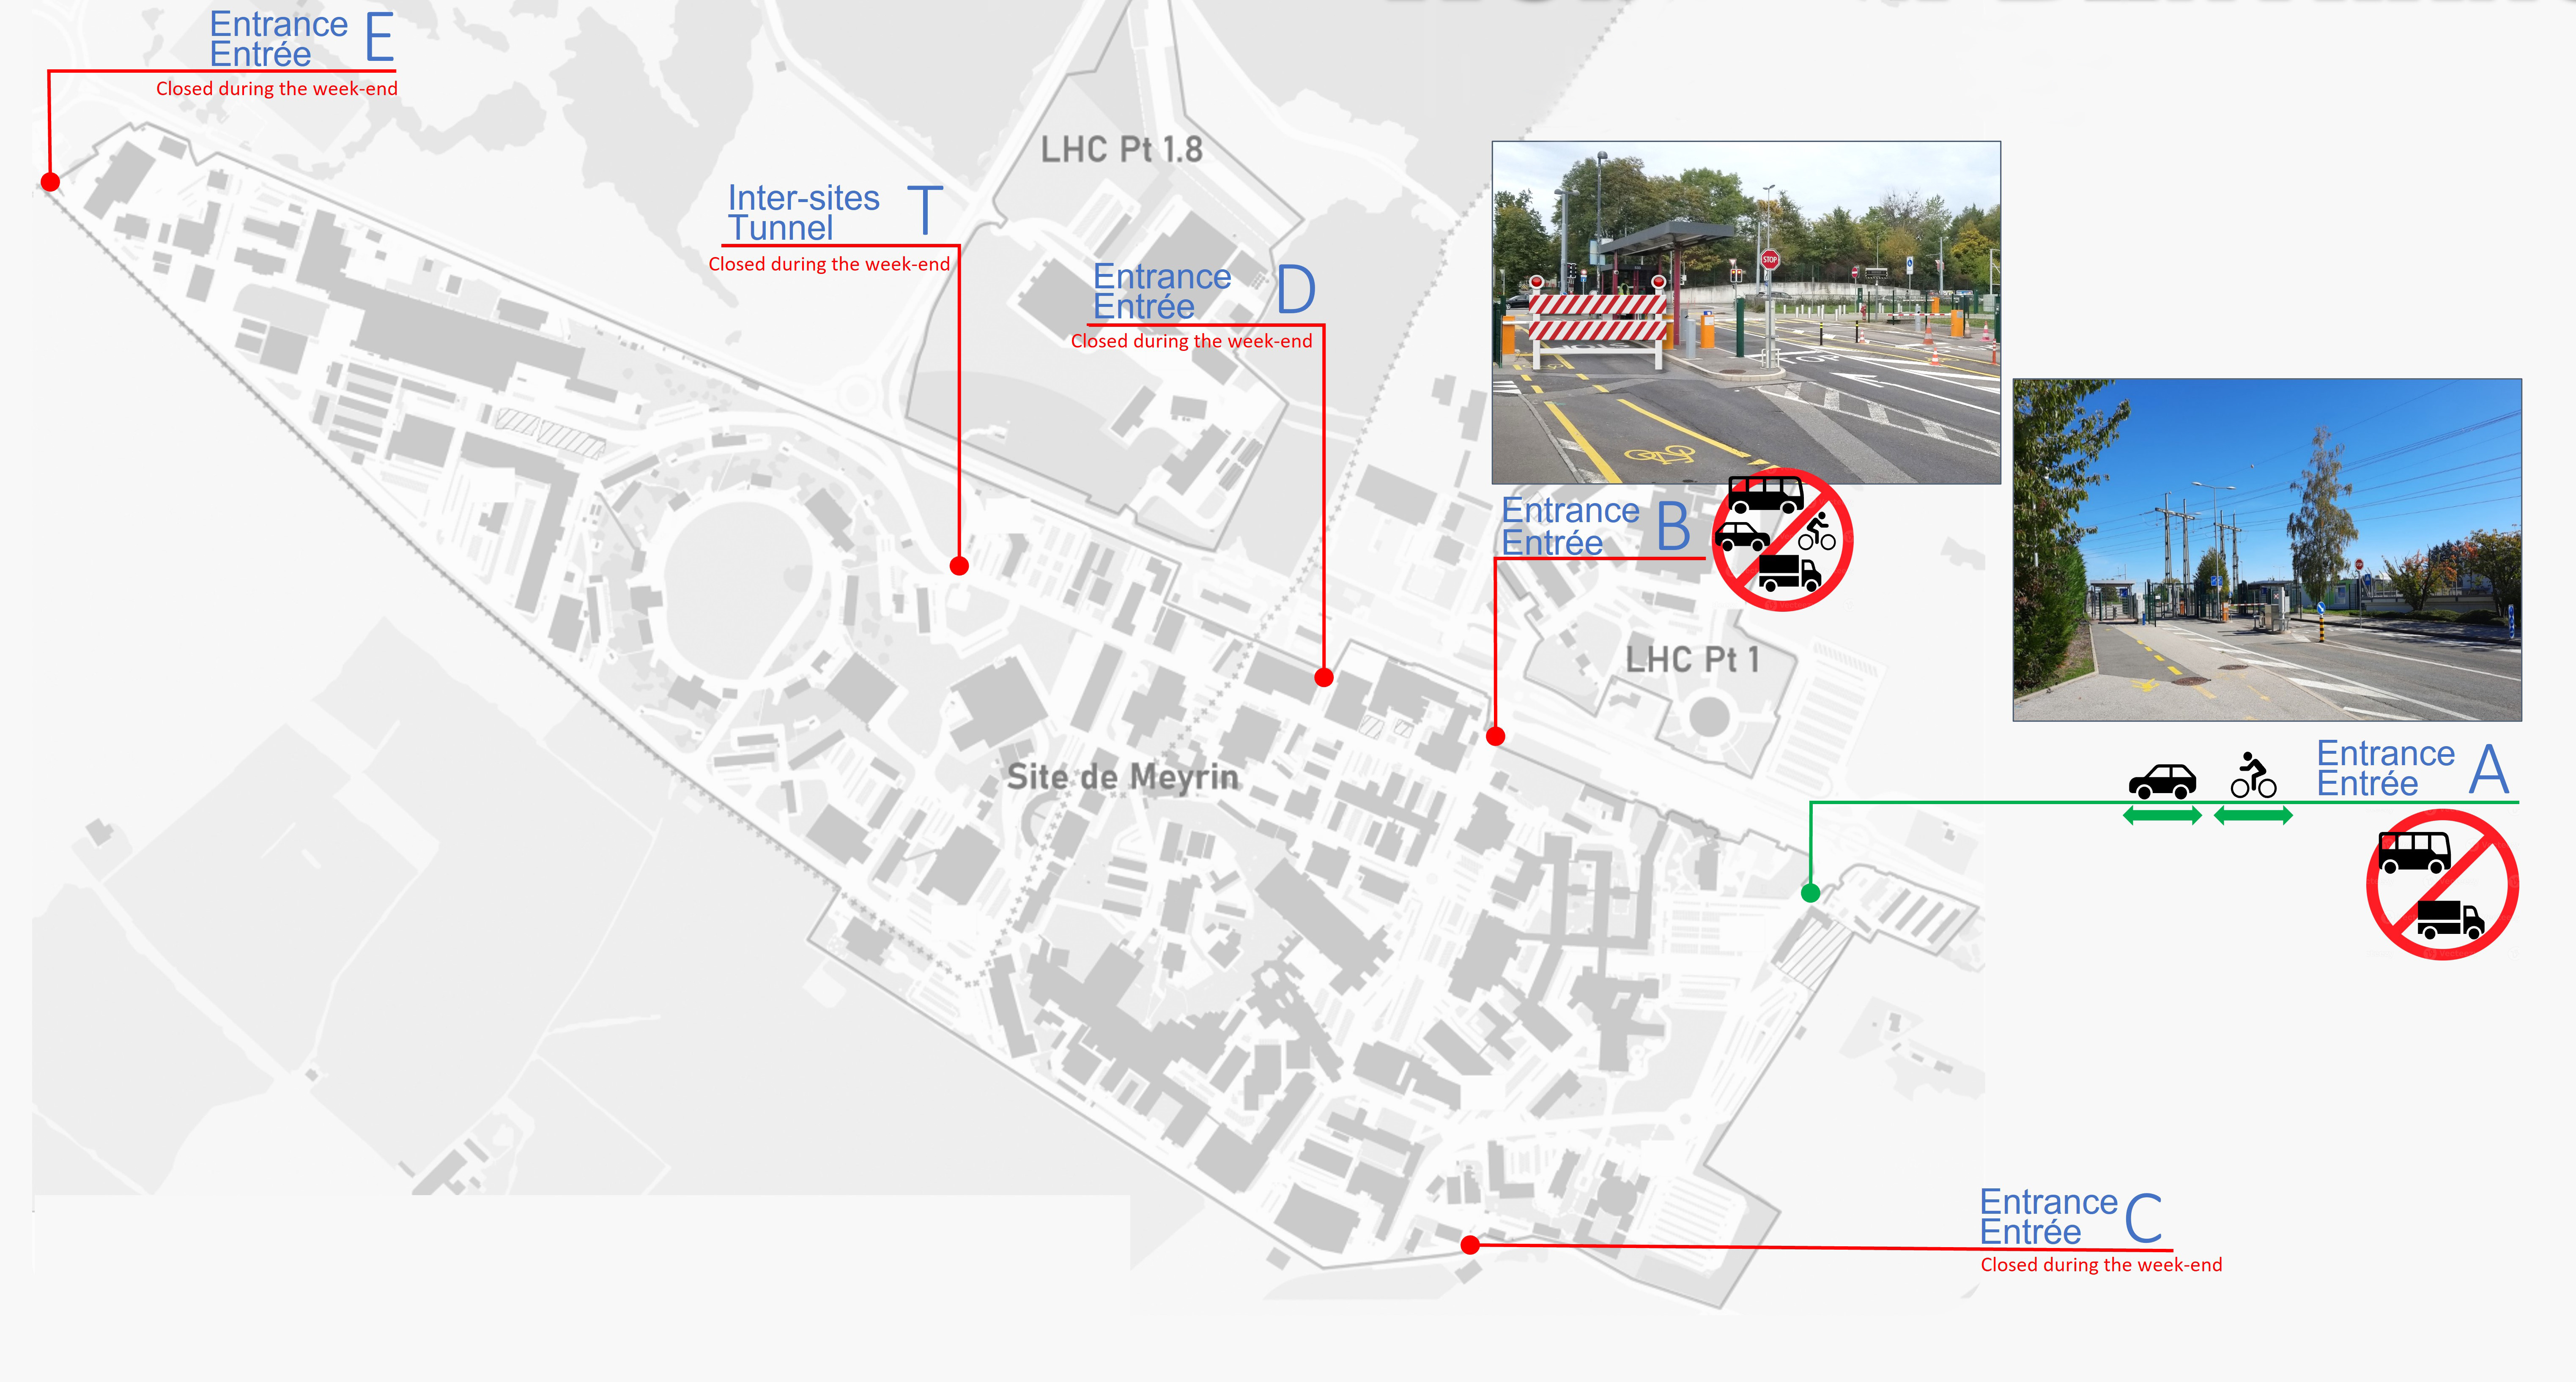 Graphic showing which entrances are closed and which are open